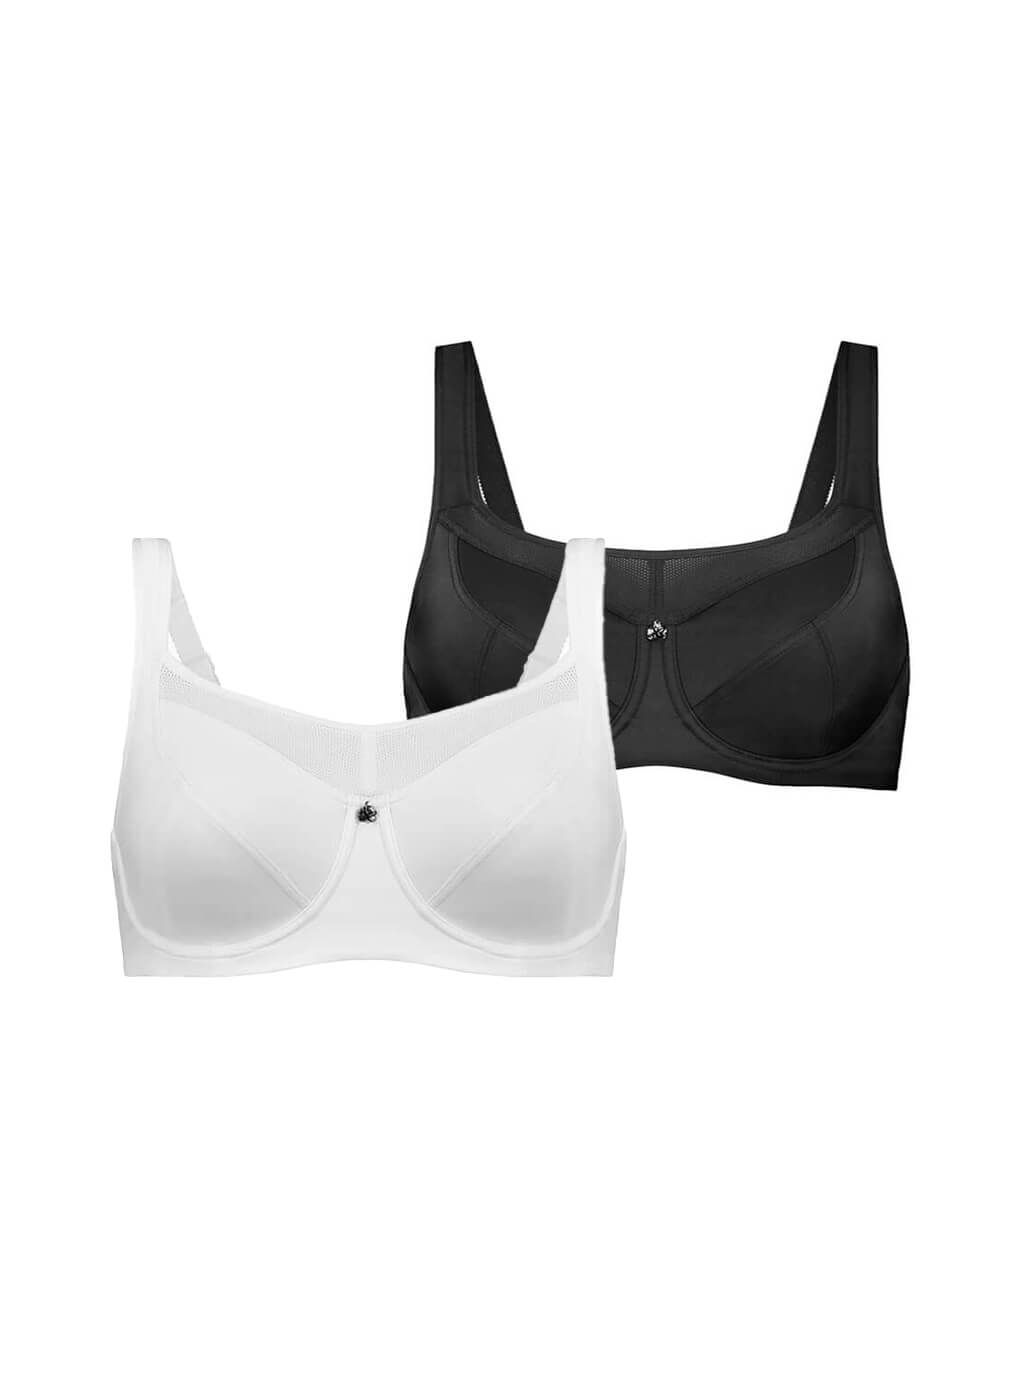 Active Bras (2 Pack) - Premium Support - Black and White